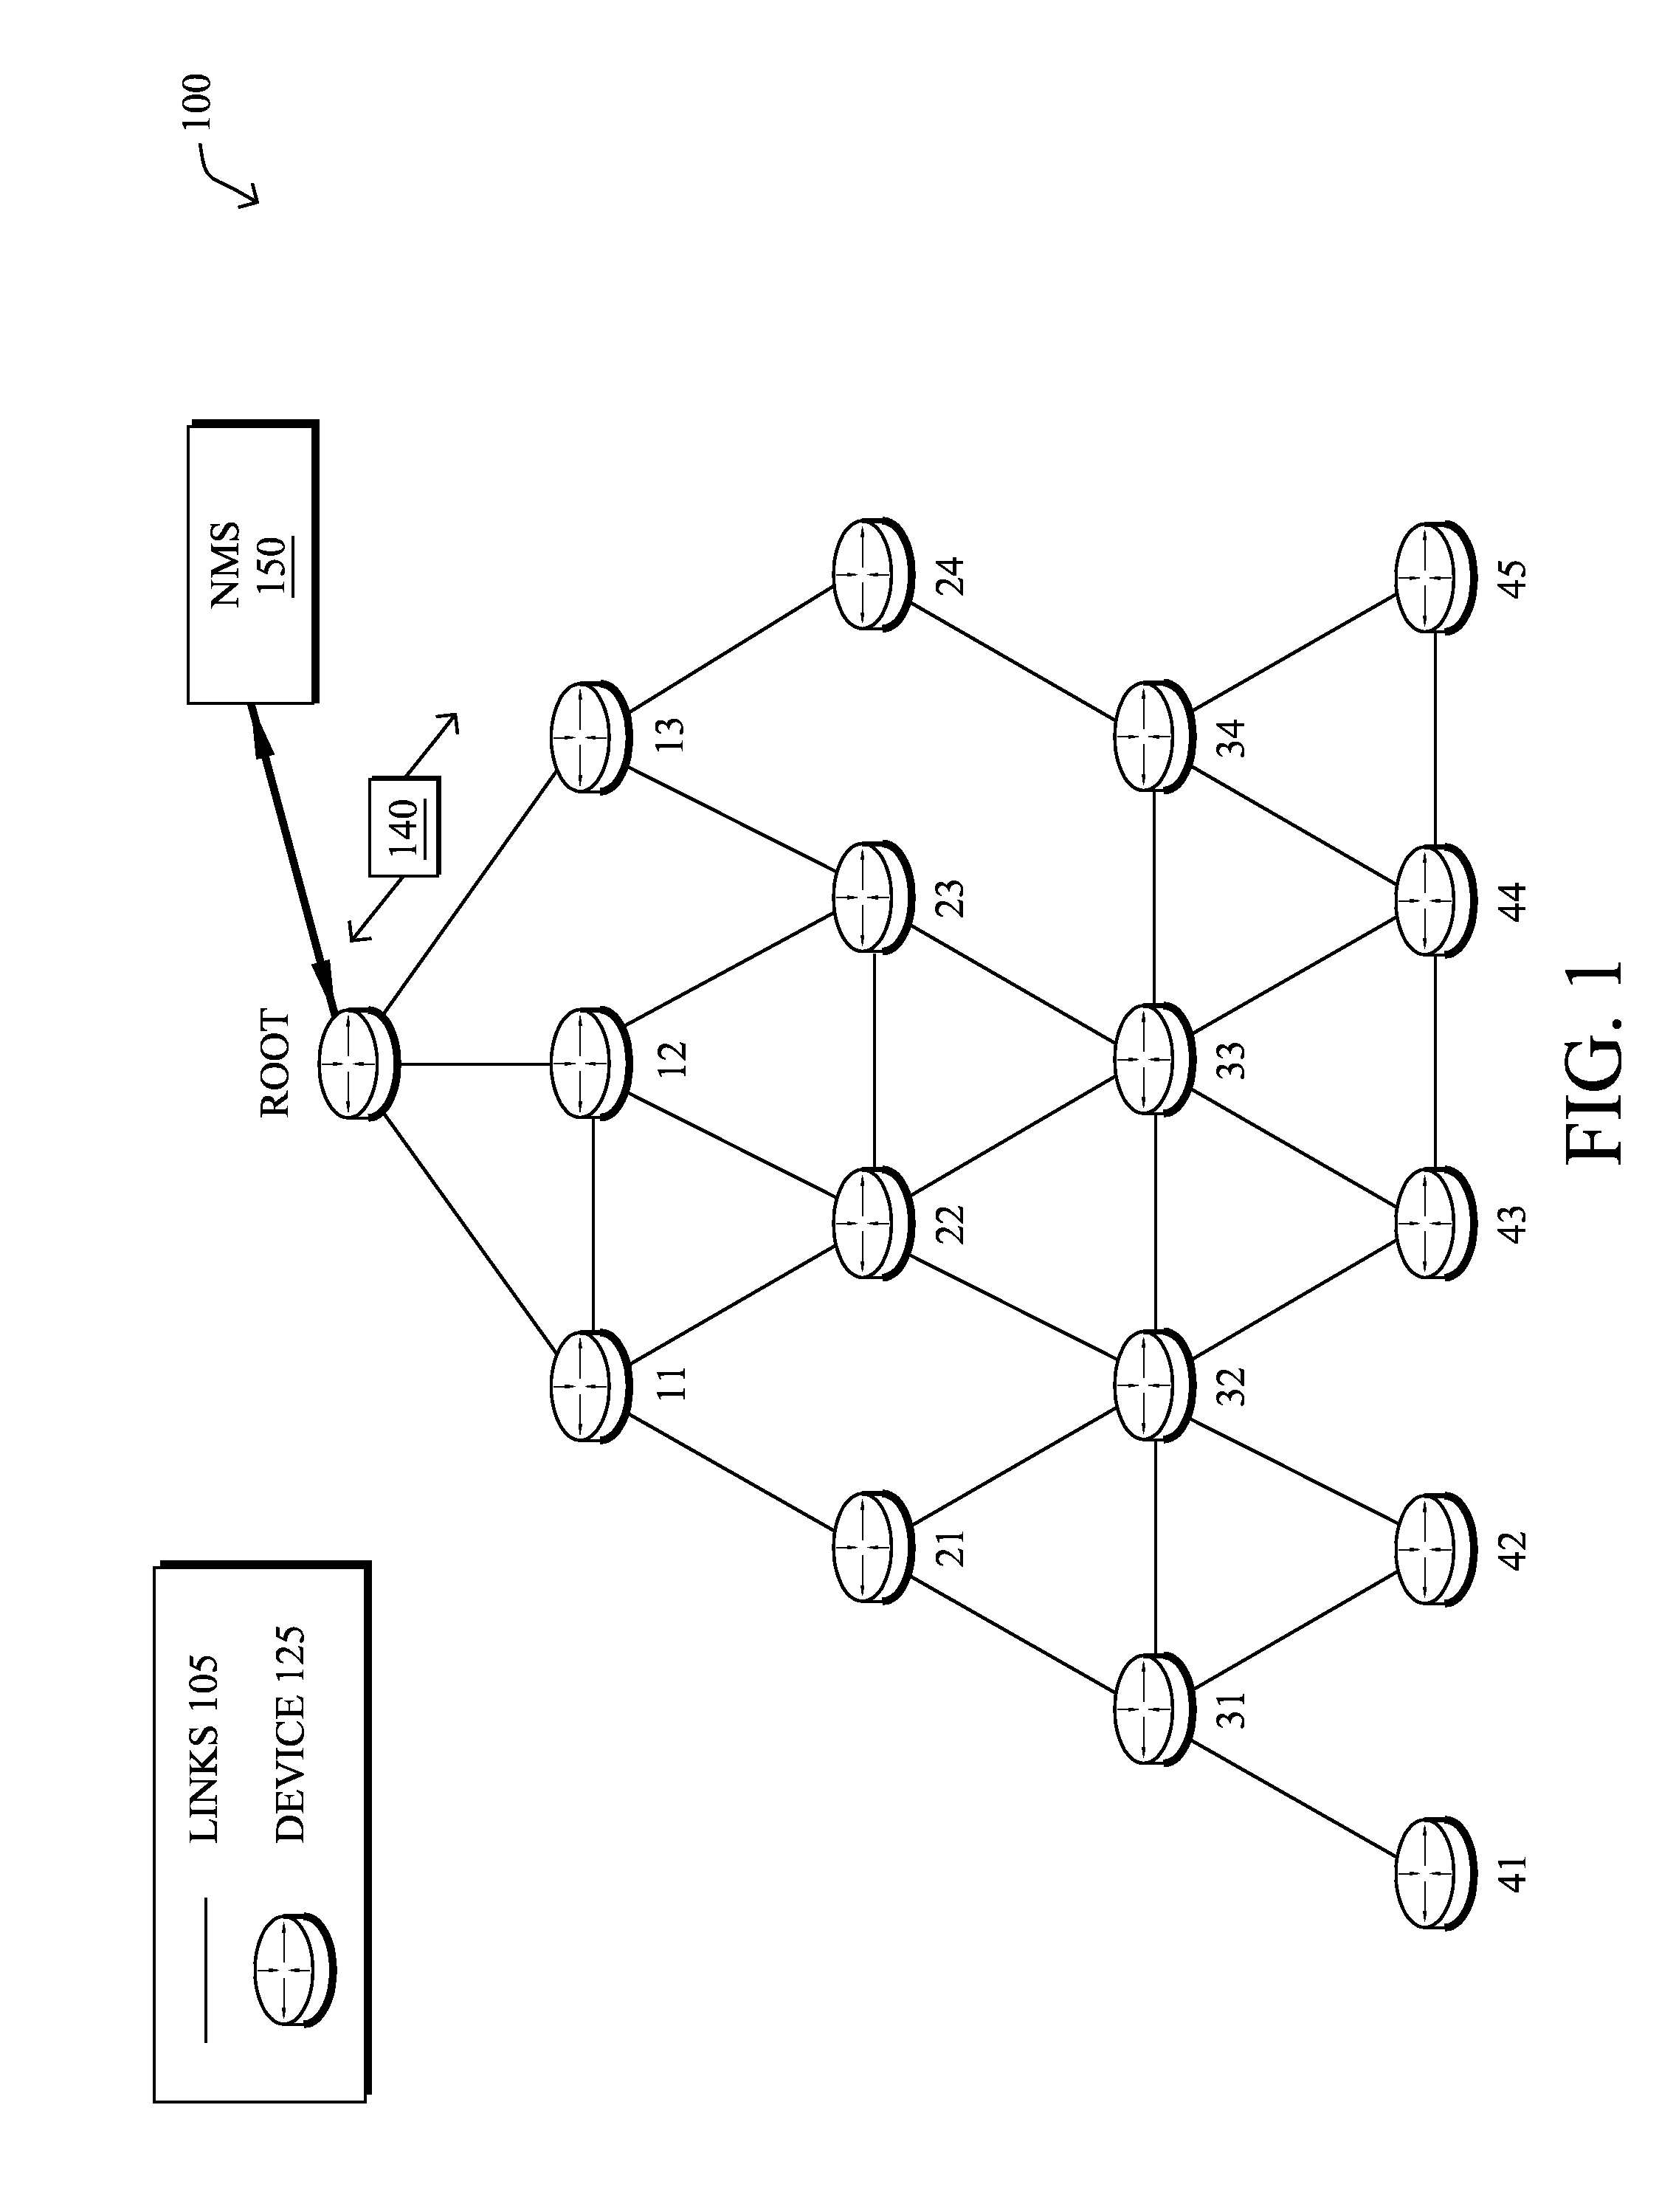 Dynamic keepalive parameters for reverse path validation in computer networks